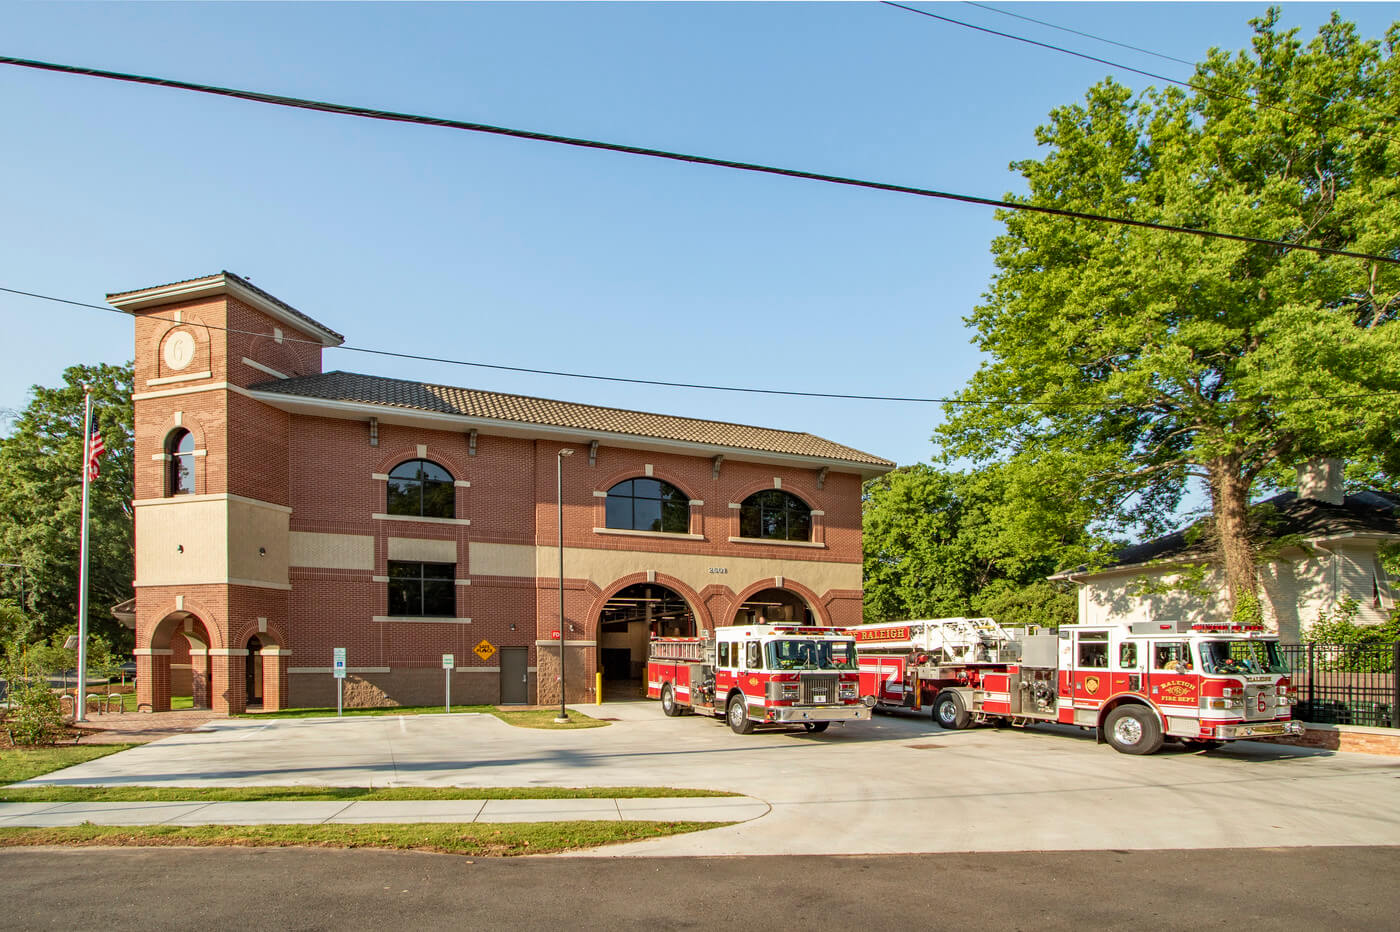 raleigh-fire-station-no-6-stewart-cooper-newell-architects